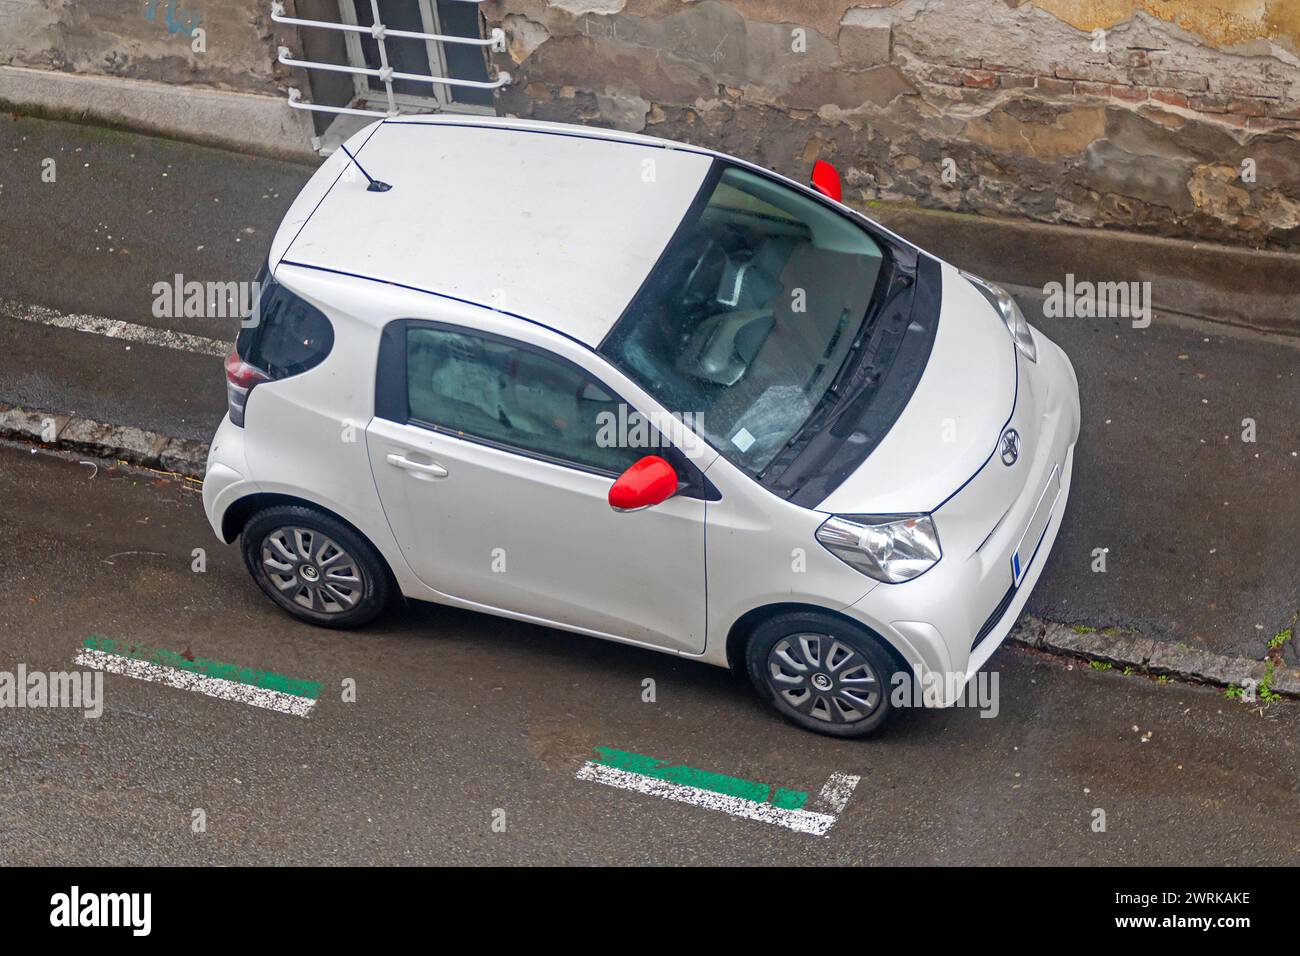 Belgrade, Serbia - January 28, 2023: Small Toyota city car with automatic gear transmission parked outside on urban street Stock Photo